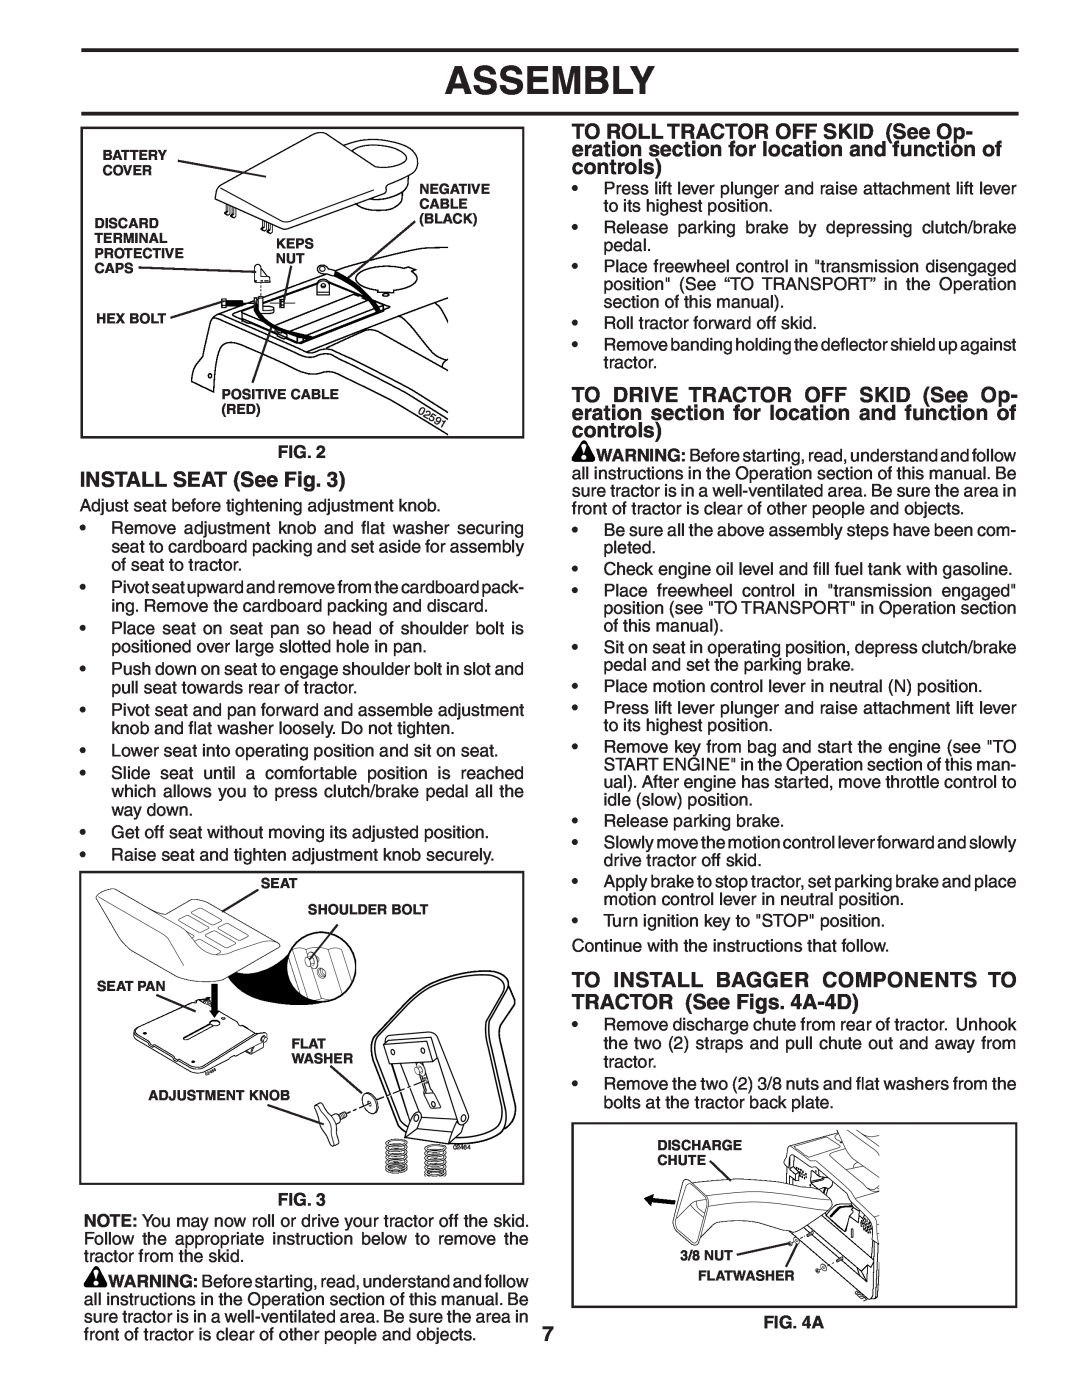 Husqvarna CTH2542 XP owner manual INSTALL SEAT See Fig, To Install Bagger Components To, TRACTOR See Figs. 4A-4D, Assembly 